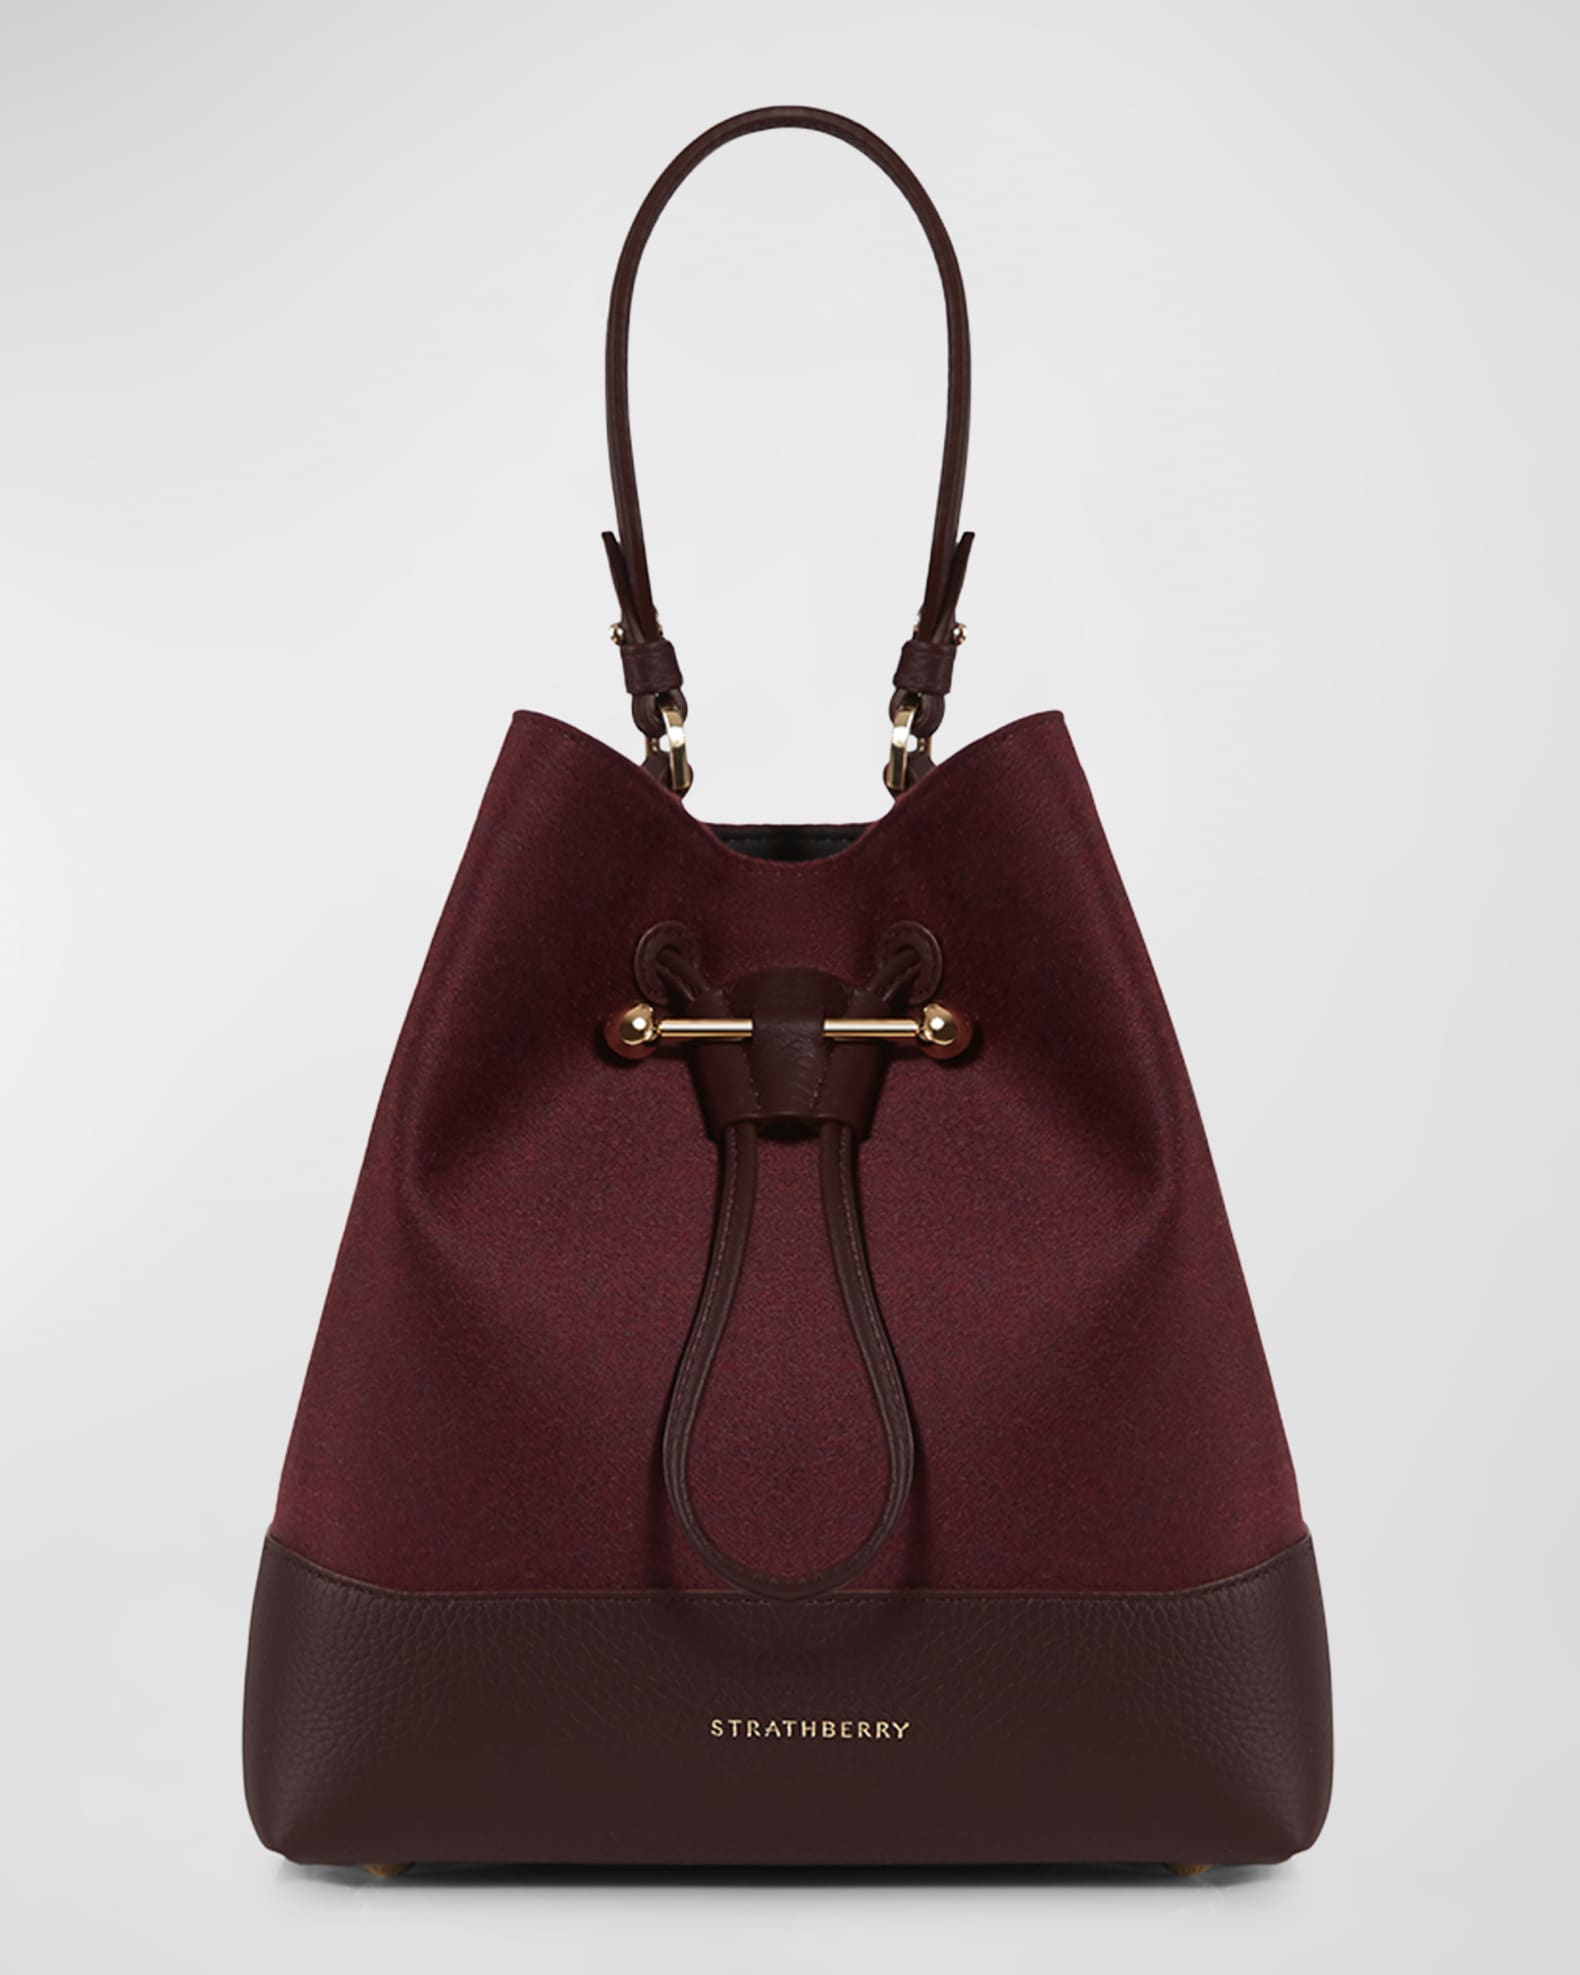 Strathberry Lana Osette Cashmere Leather Bucket Bag